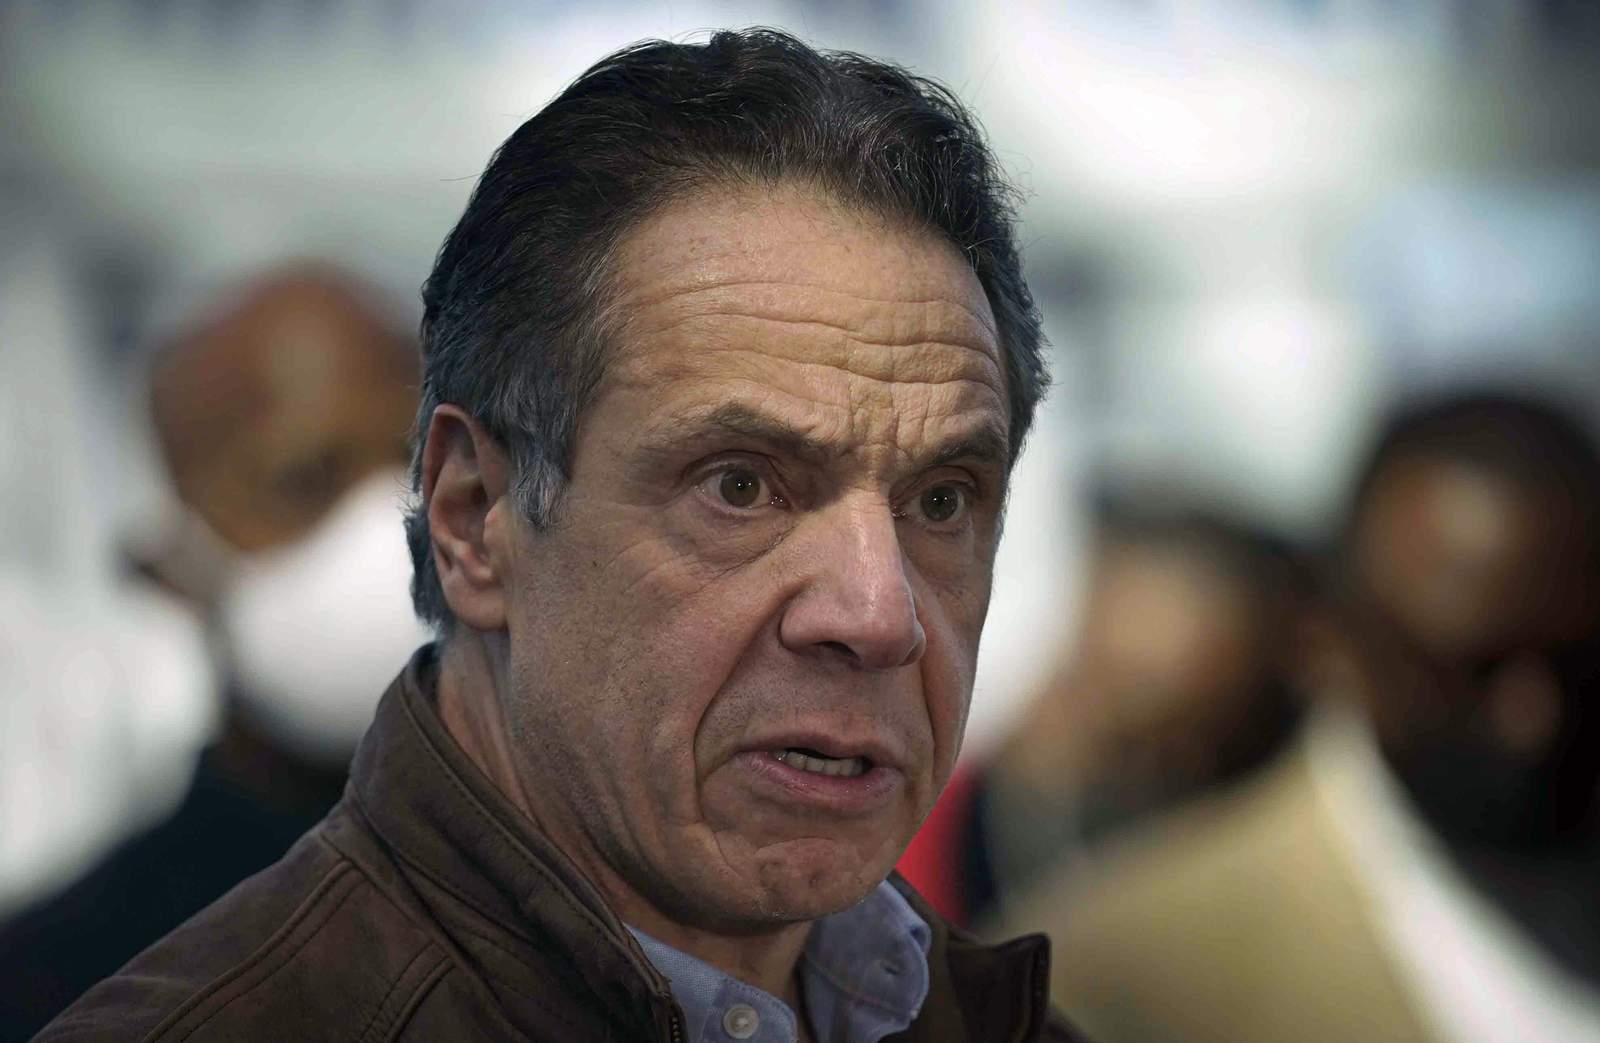 Claims against Cuomo: A look at the women's allegations